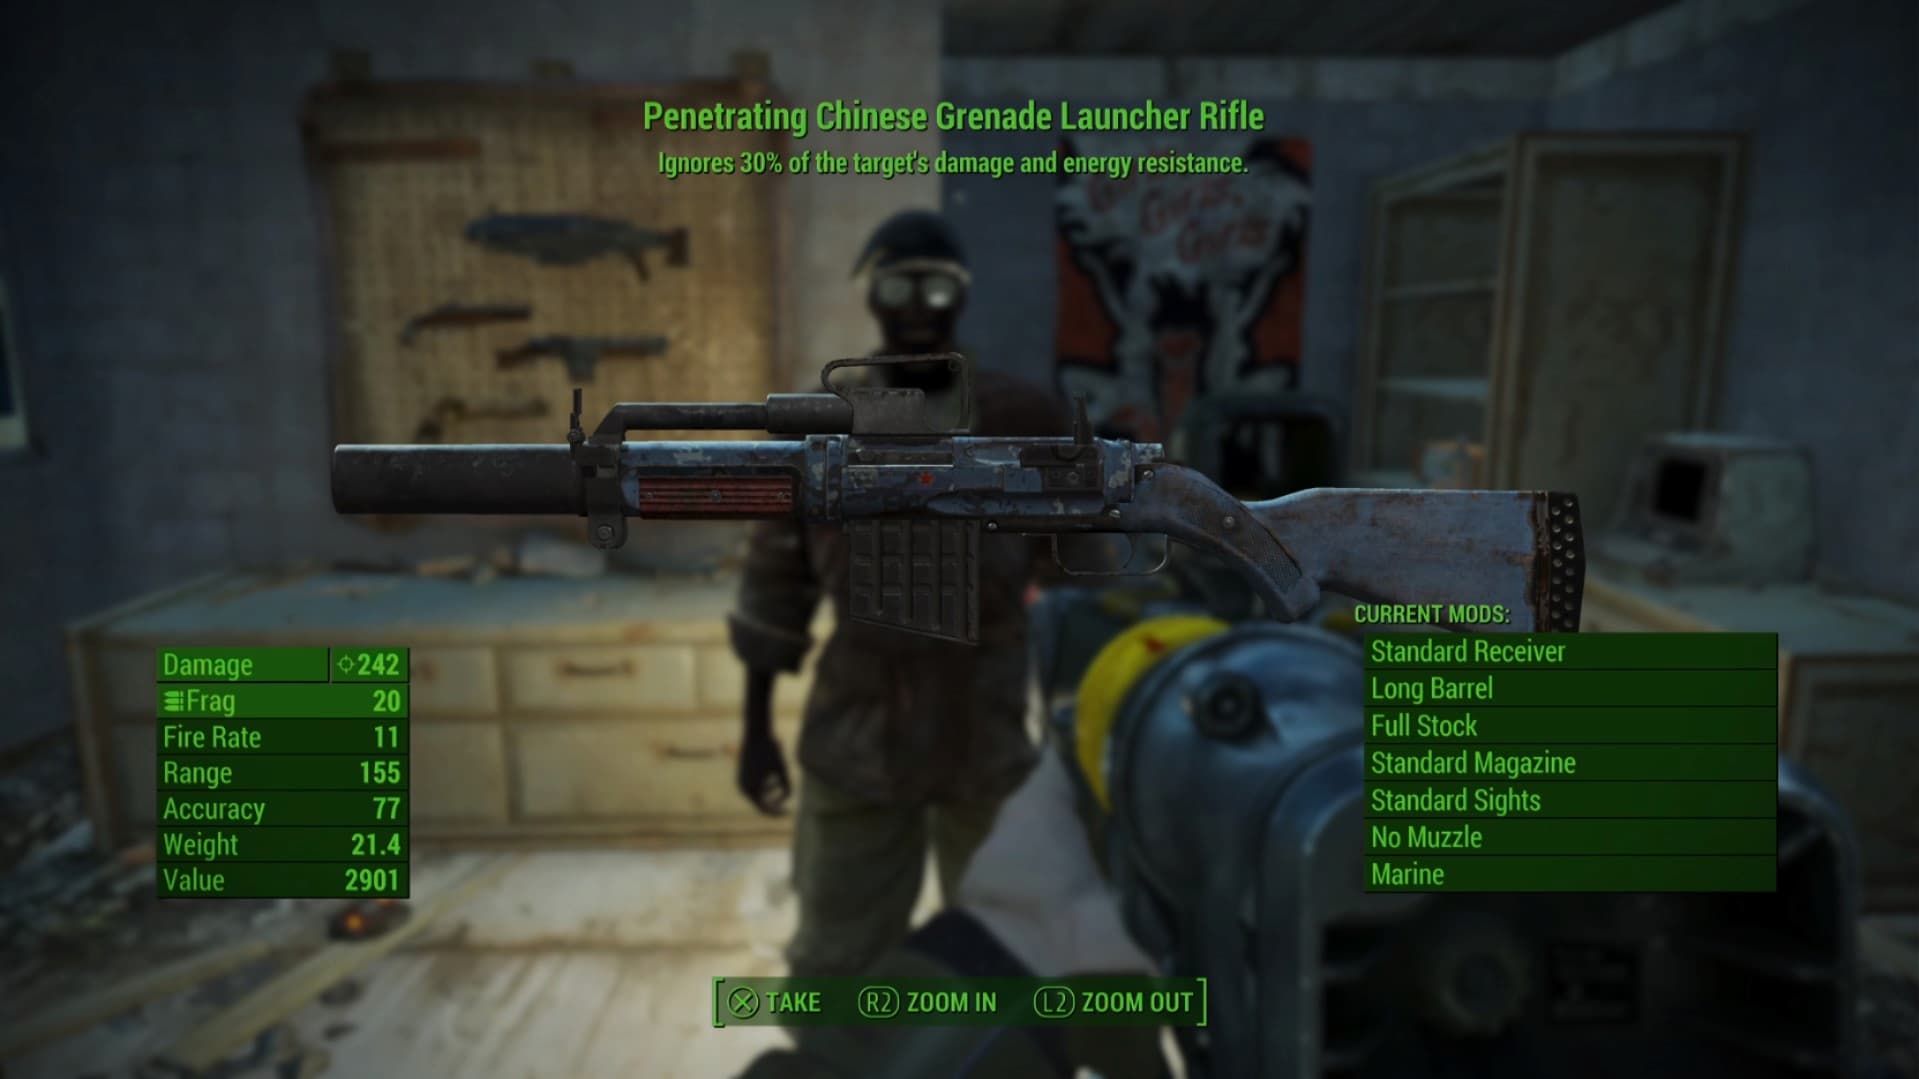 The Penetrating Chinese Grenade Launcher Rifle weapon you get as a reward in Fallout 4's When Pigs Fly quest